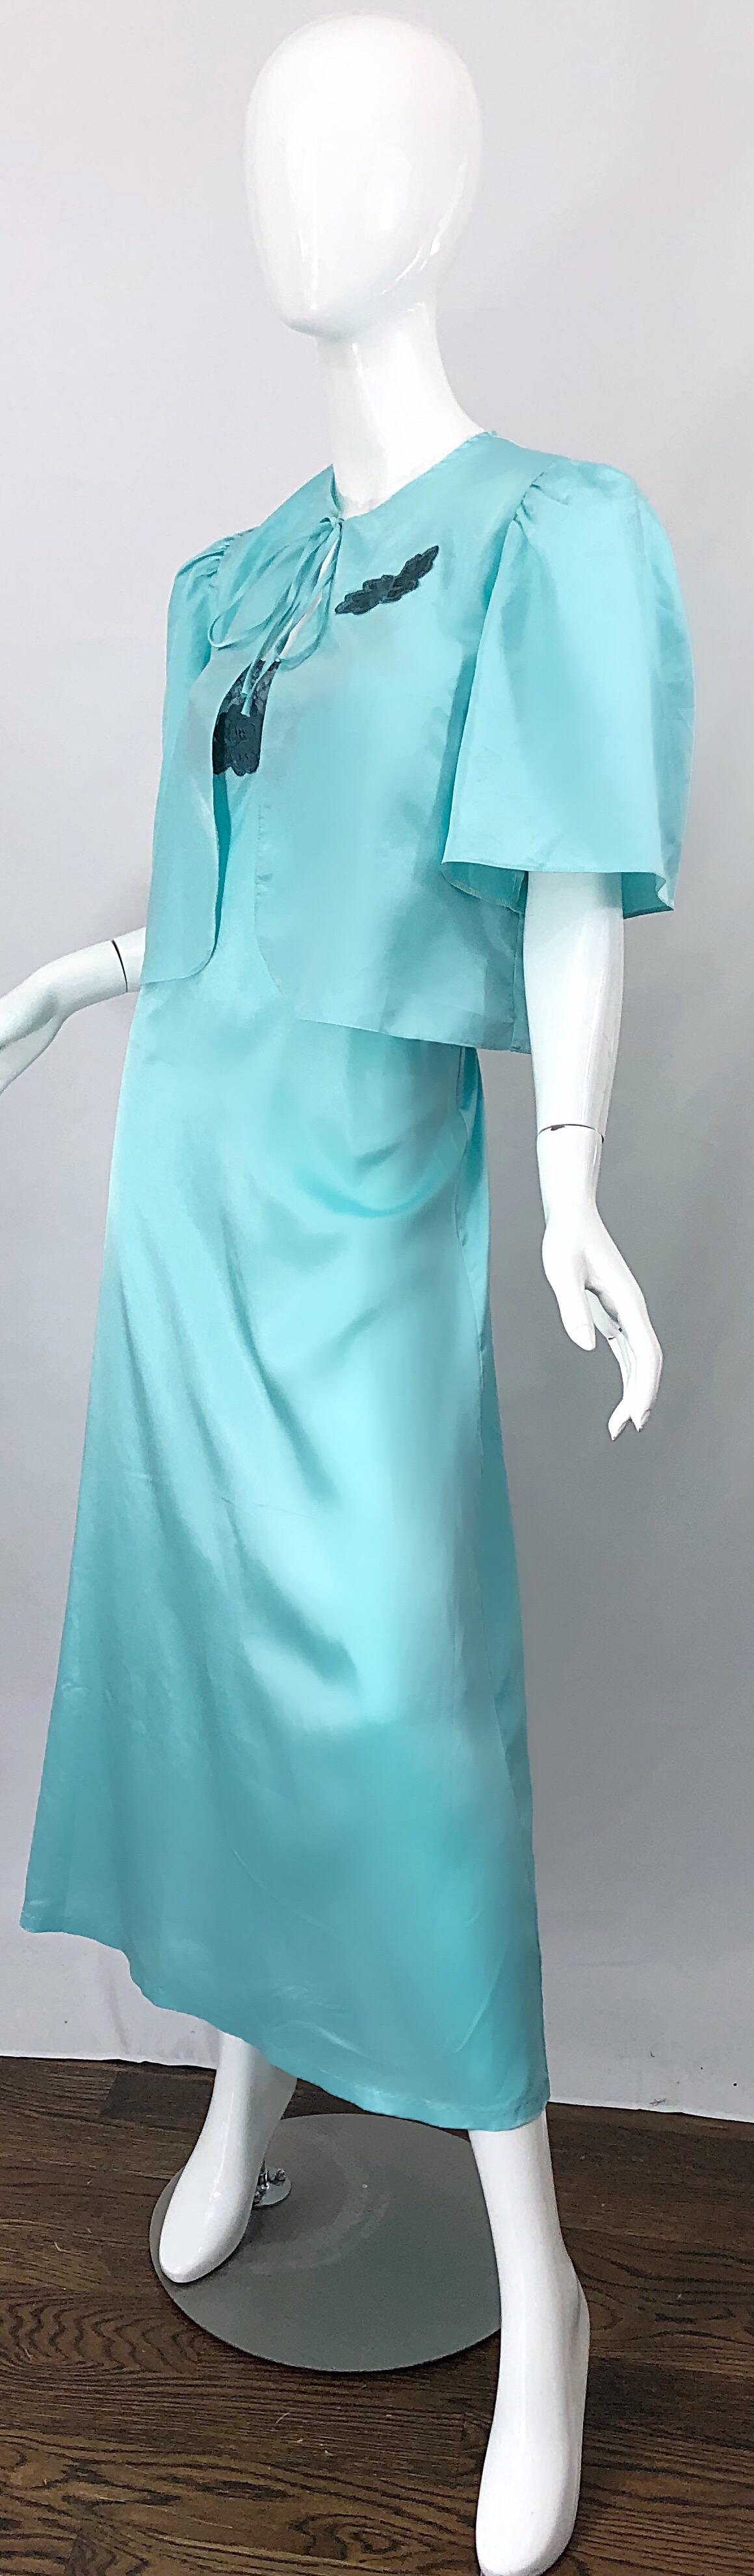 1980s Yves Saint Laurent Robins Egg Blue Vintage 80s Negligee + Jacket Set YSL In Excellent Condition For Sale In San Diego, CA